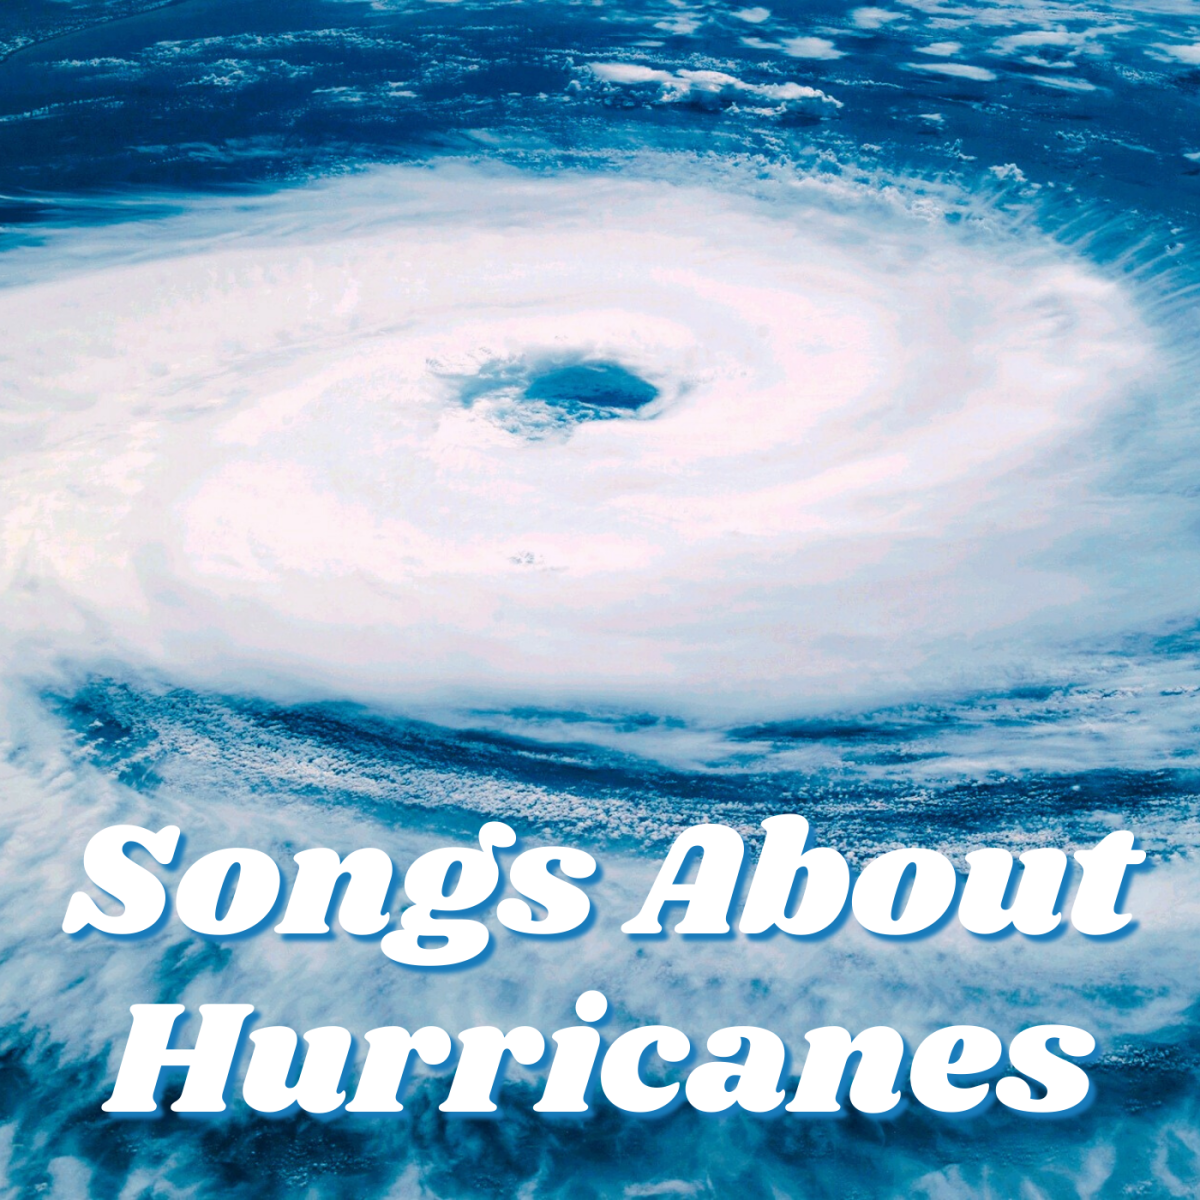 46 Songs About Hurricanes